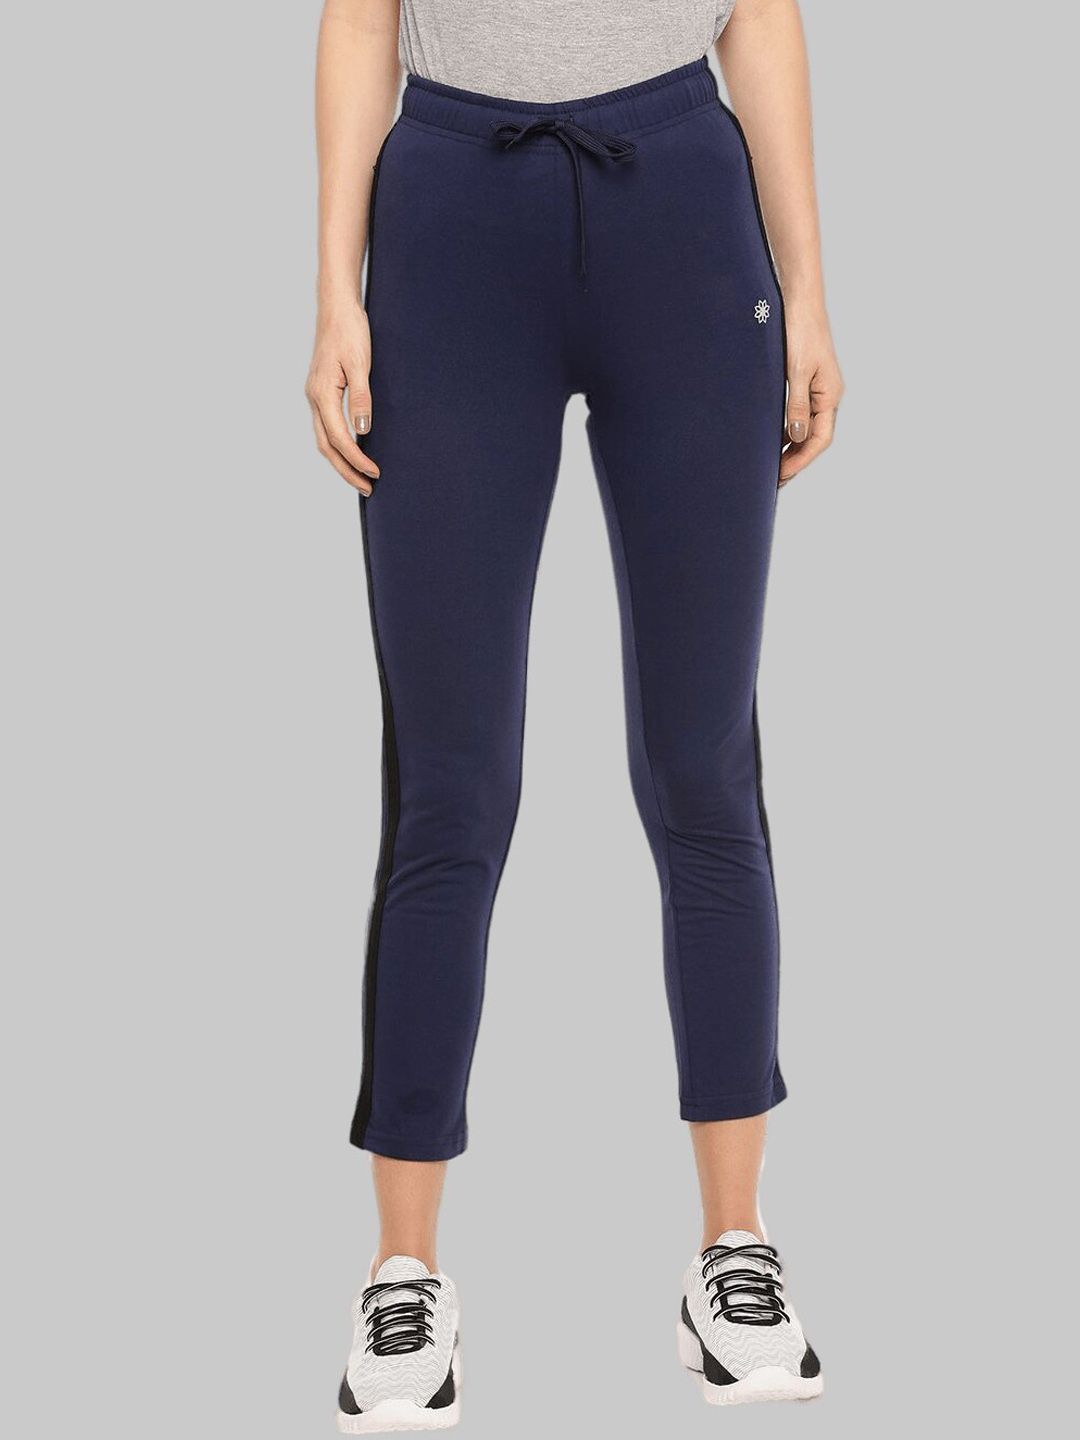 Dollar Missy Women Navy Blue Striped Cotton Dry fit Track Pants Price in India